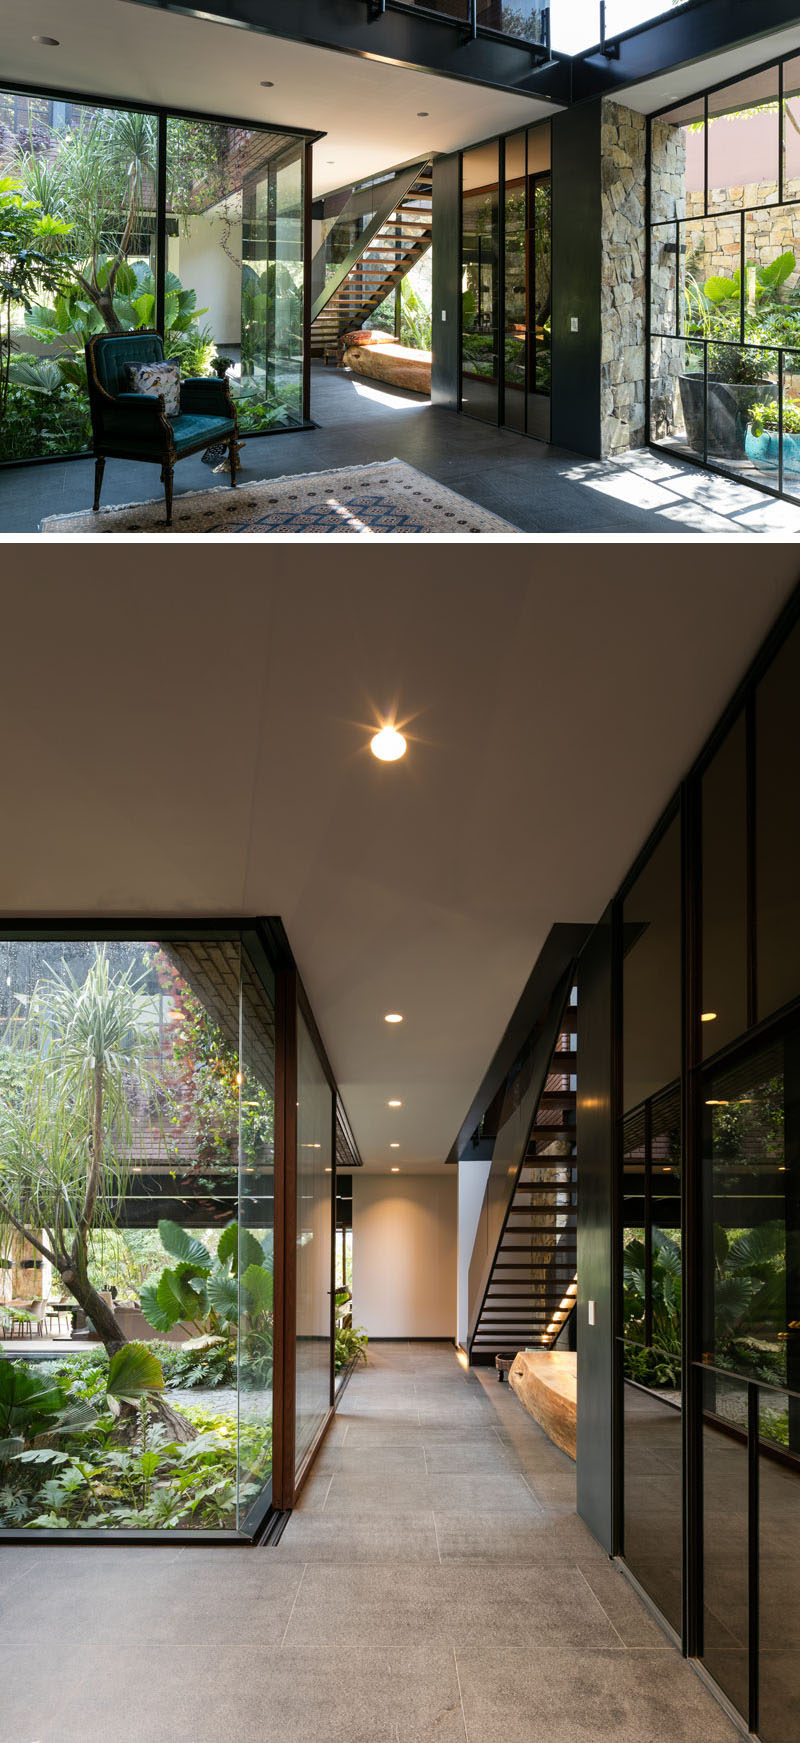 This modern house has a glass wall that shows off the internal courtyard from hallway.